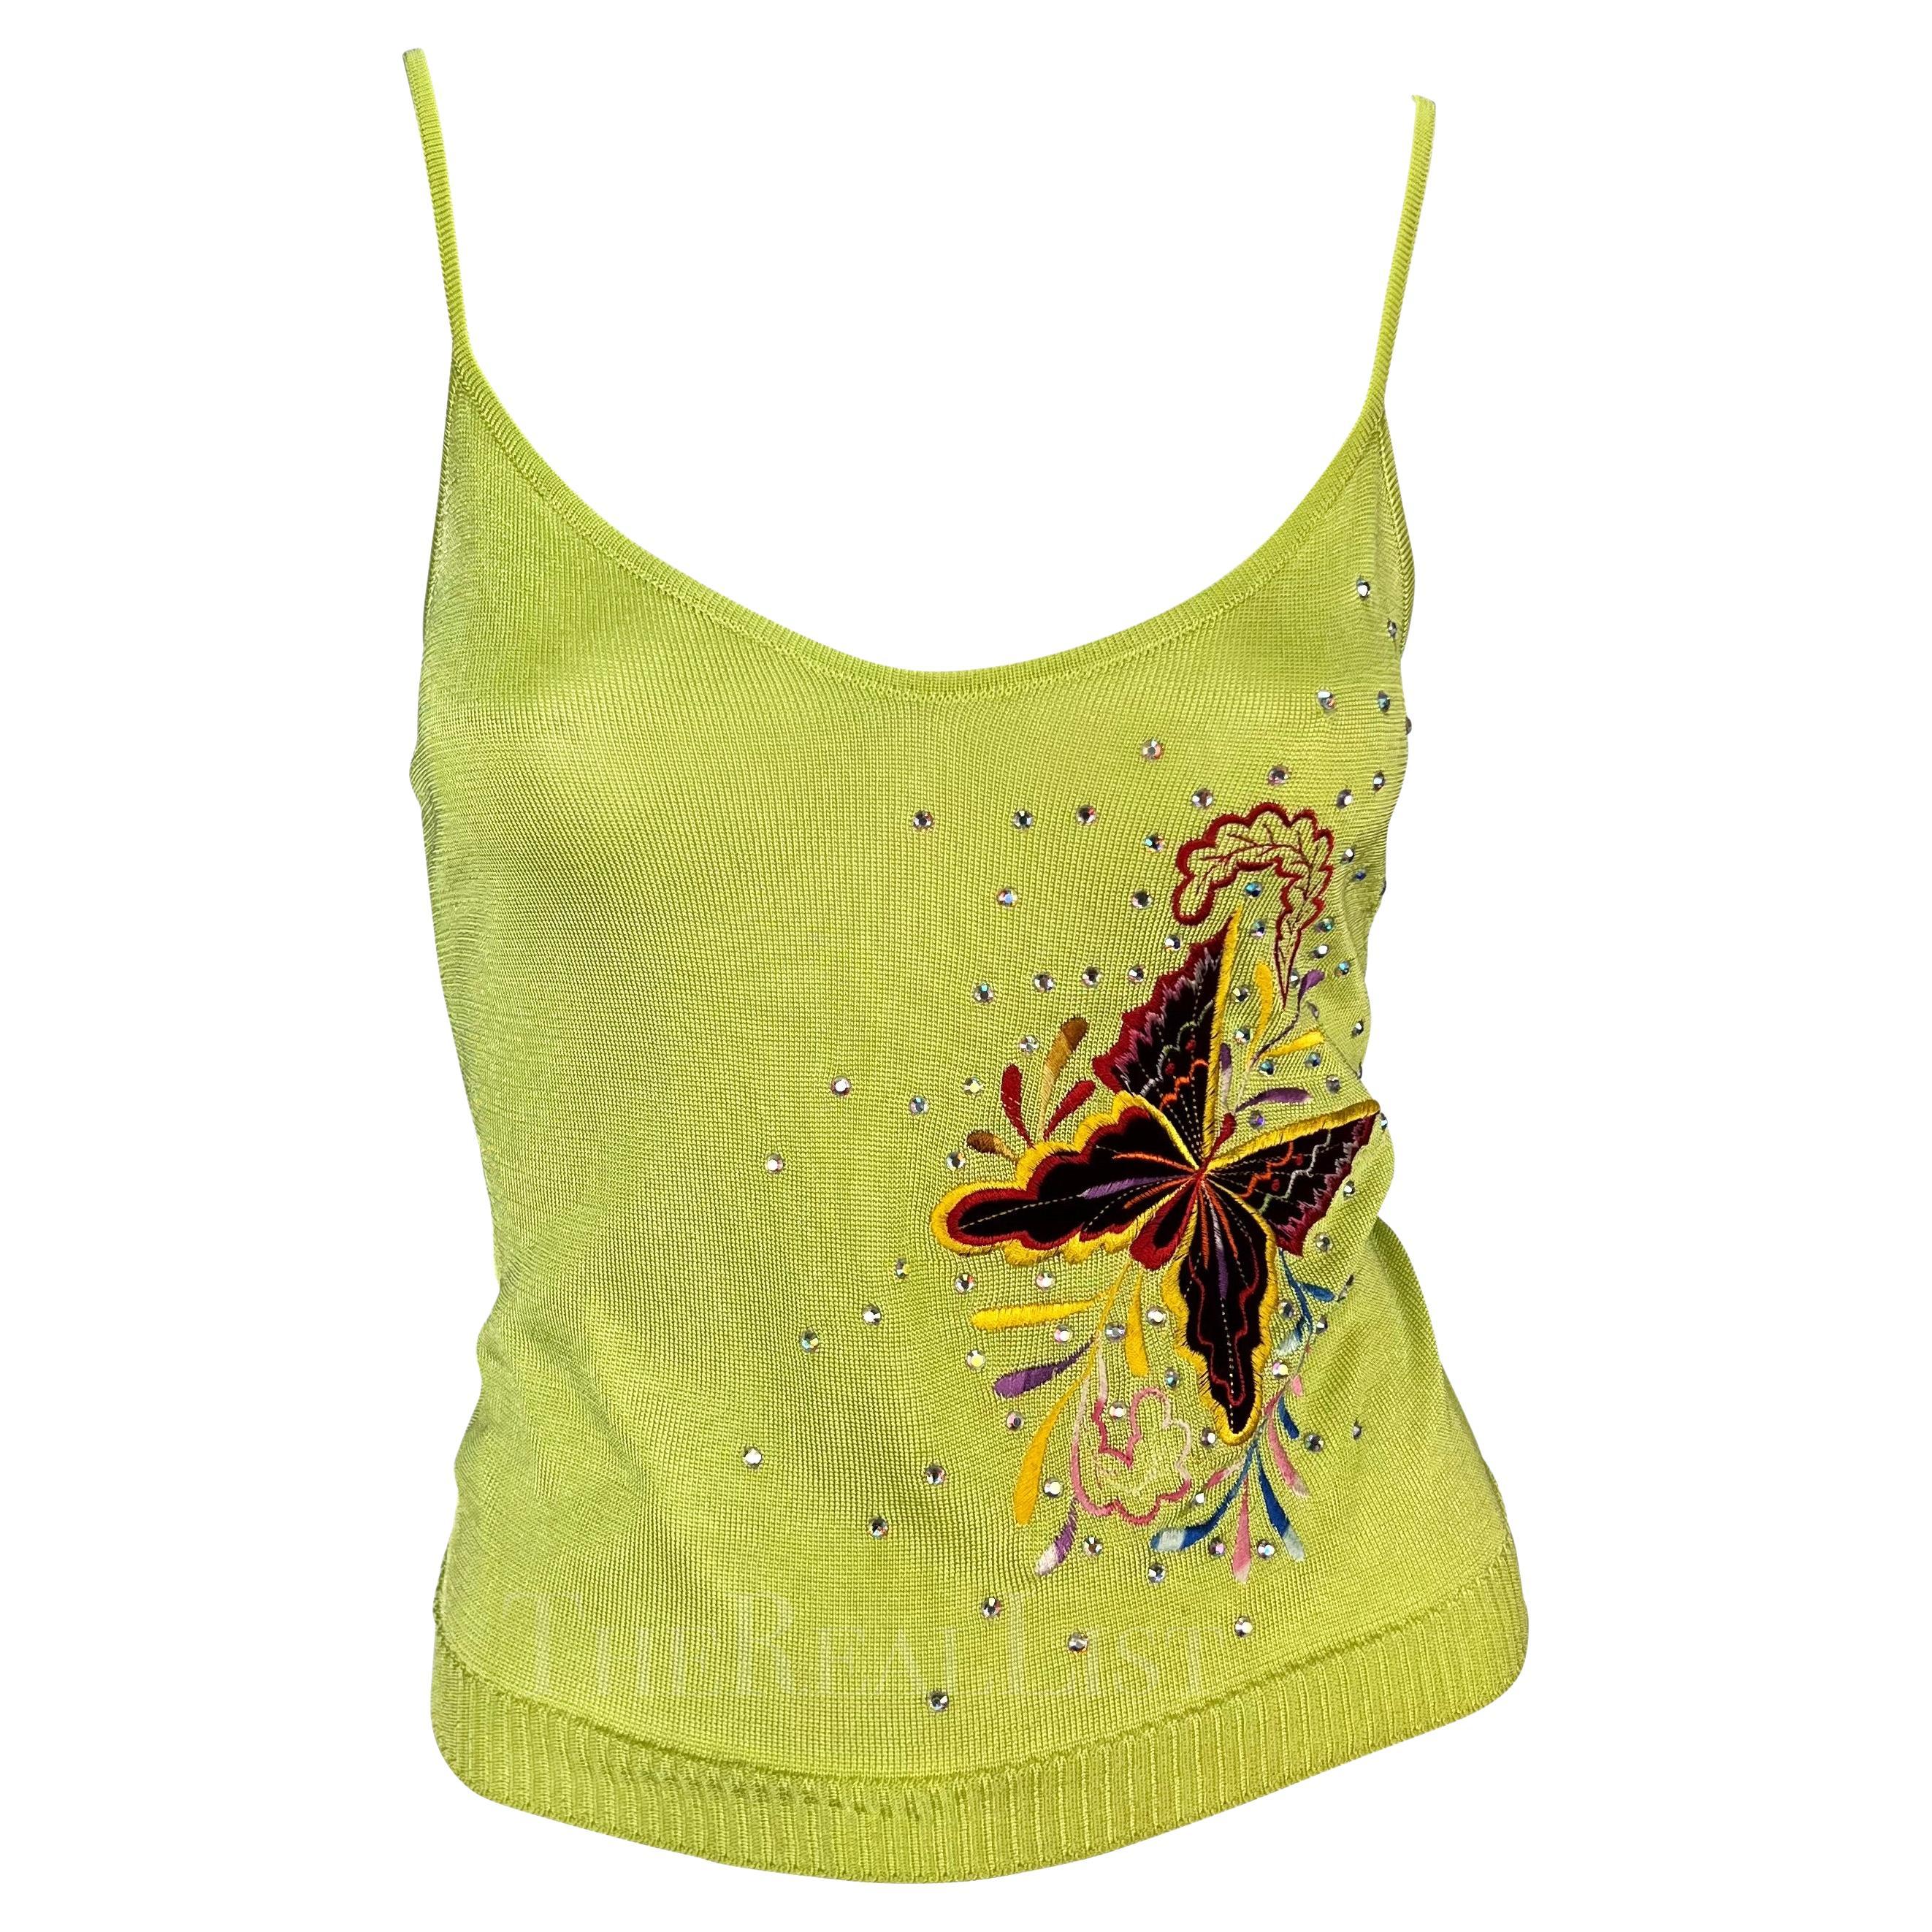 S/S 2002 Christian Dior by John Galliano for Butterfly Embellished Knit Tank Top  Excellent état à West Hollywood, CA